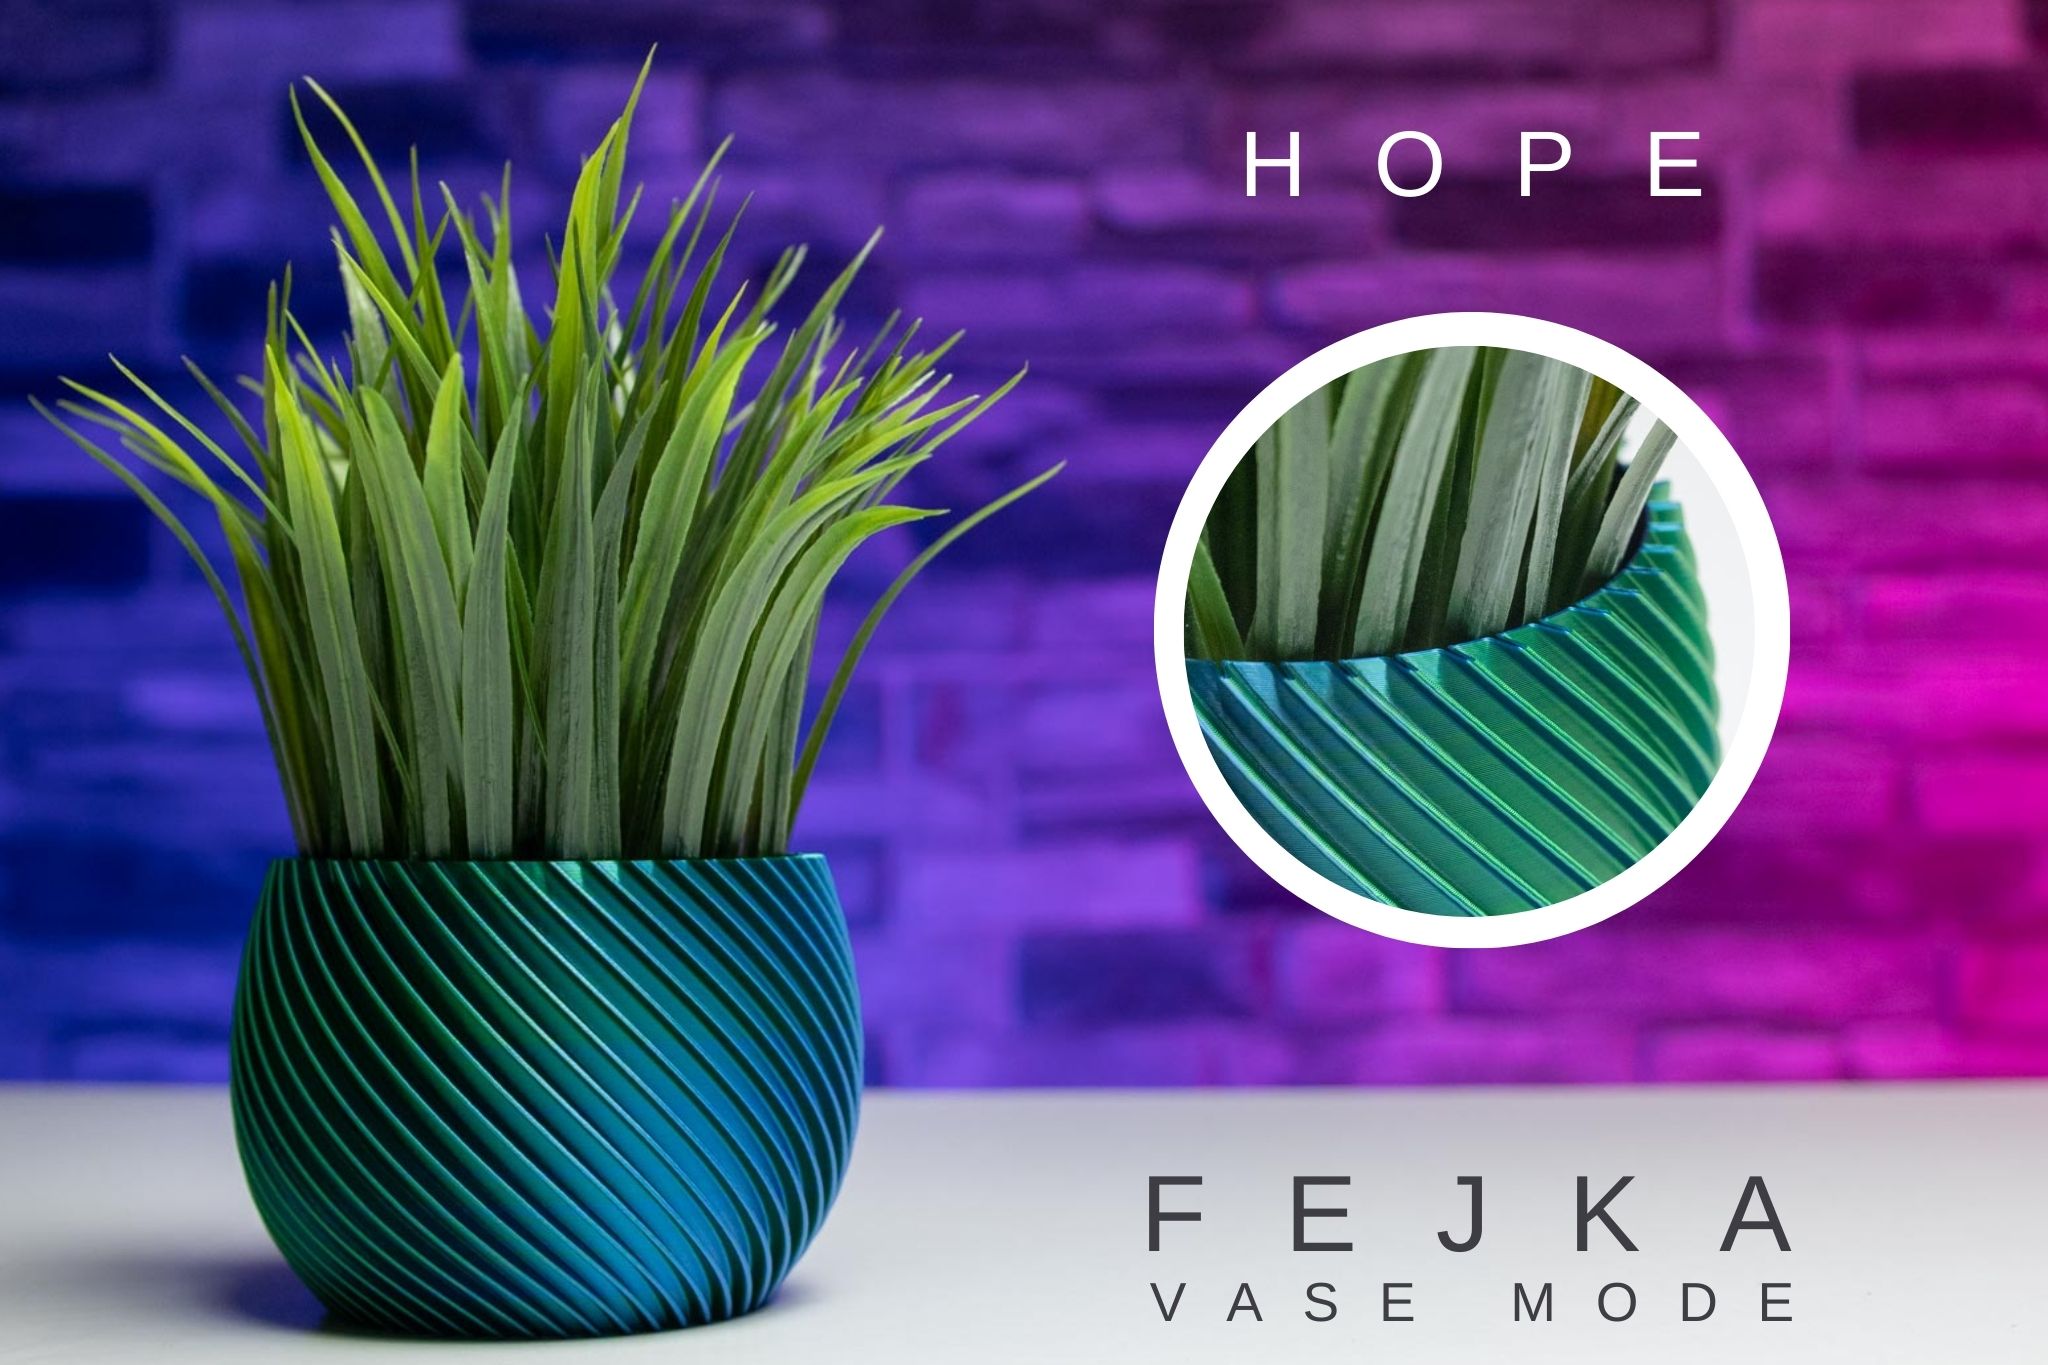 3D Printed Planter and Pot for Ikea Fejka - Vase HOPE